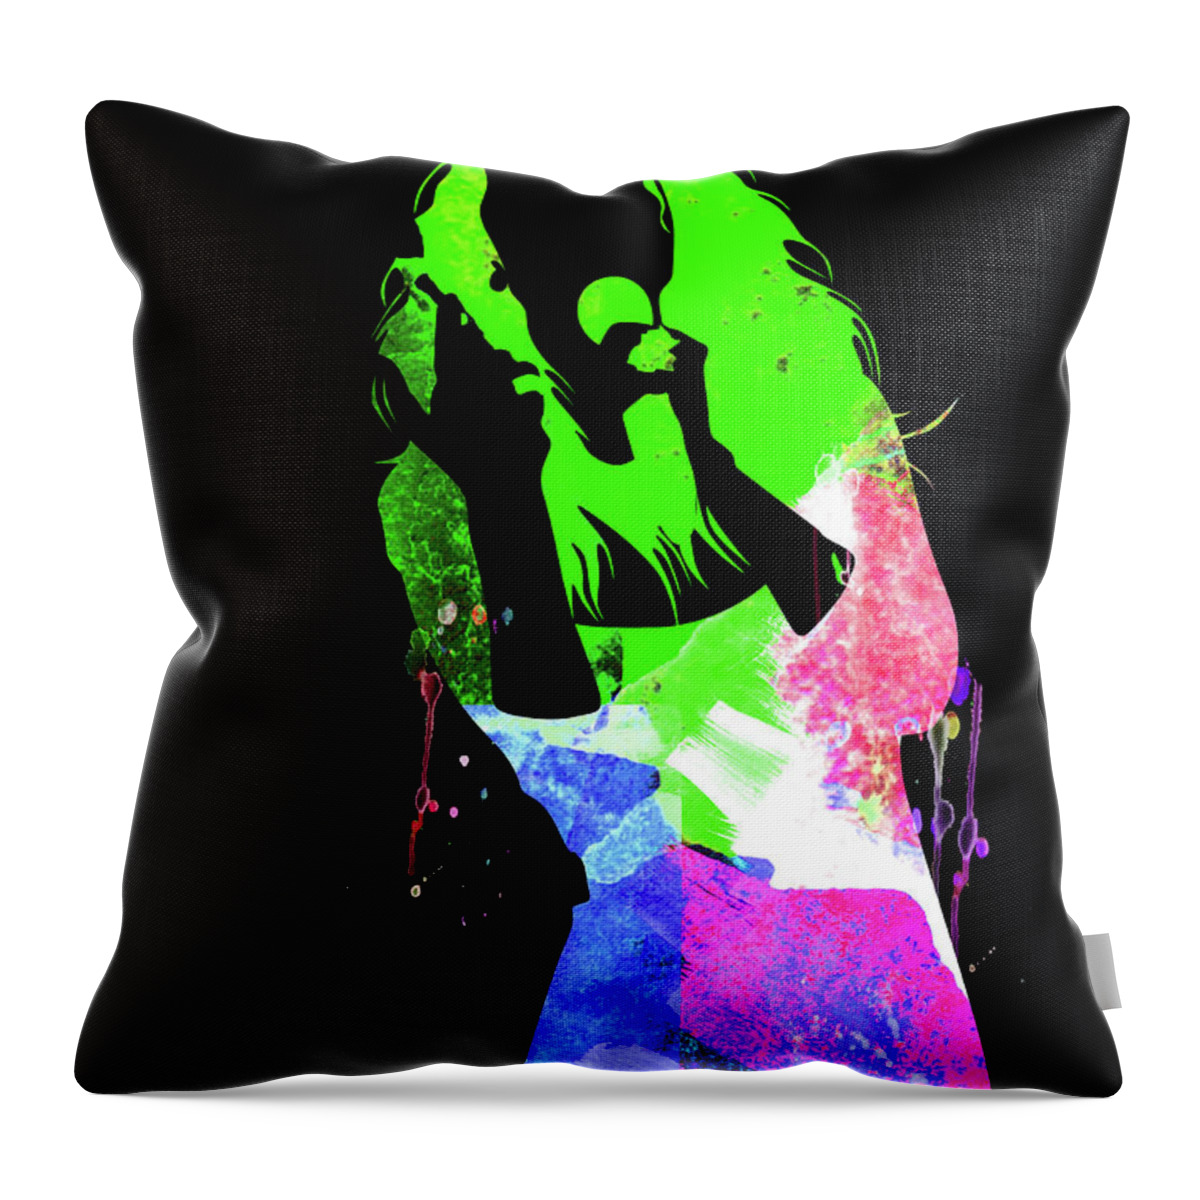 Celine Dion Throw Pillow featuring the mixed media Celine Watercolor by Naxart Studio